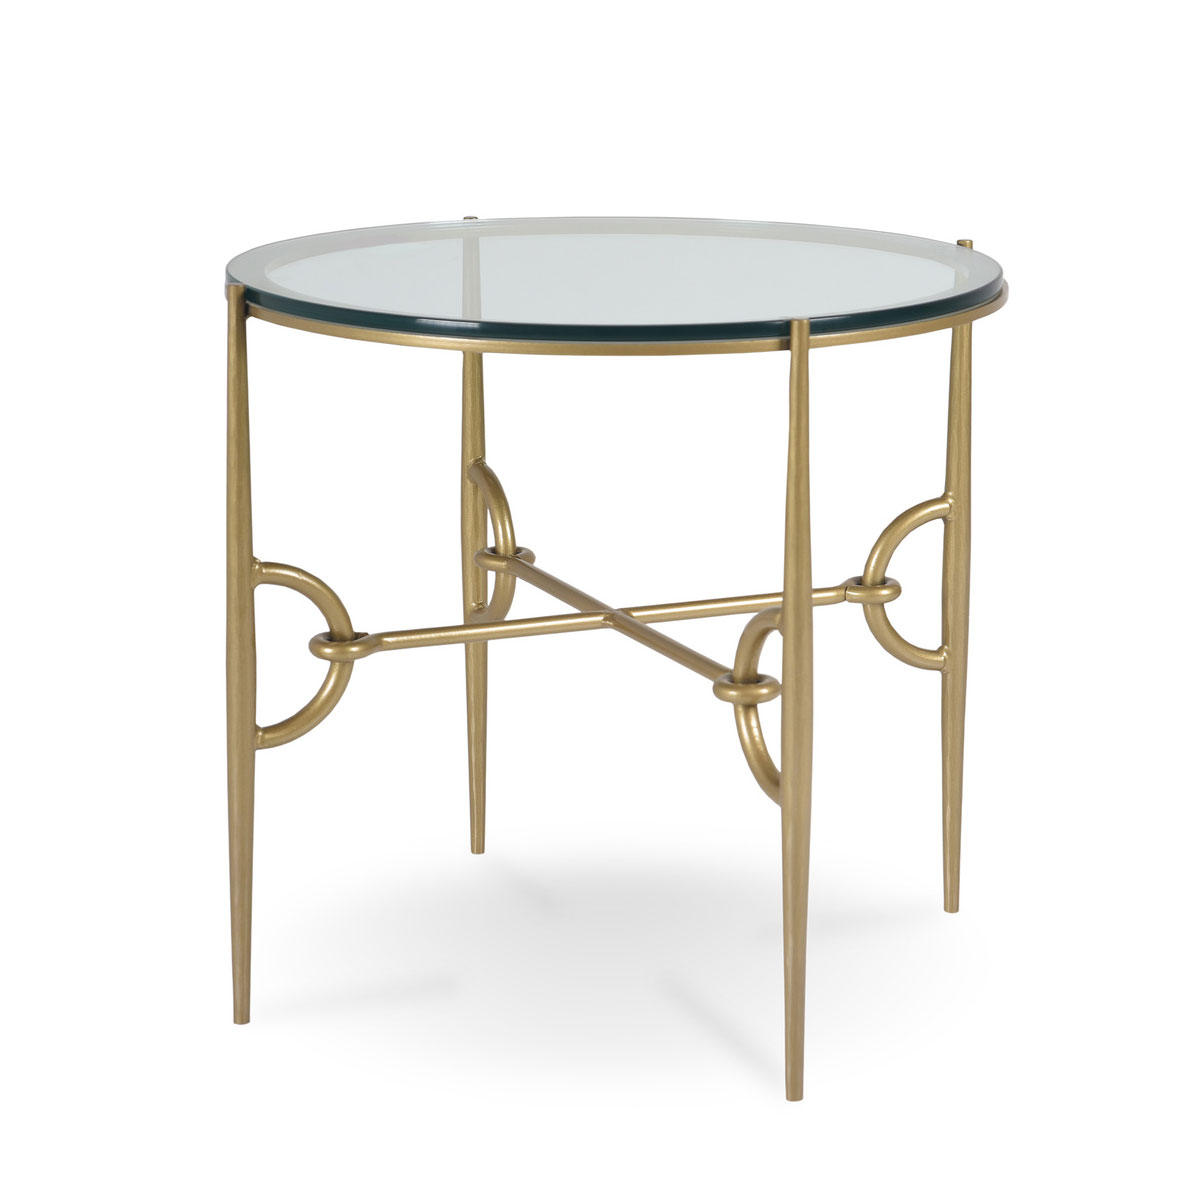 Charleston Forge Paddock Round End Table